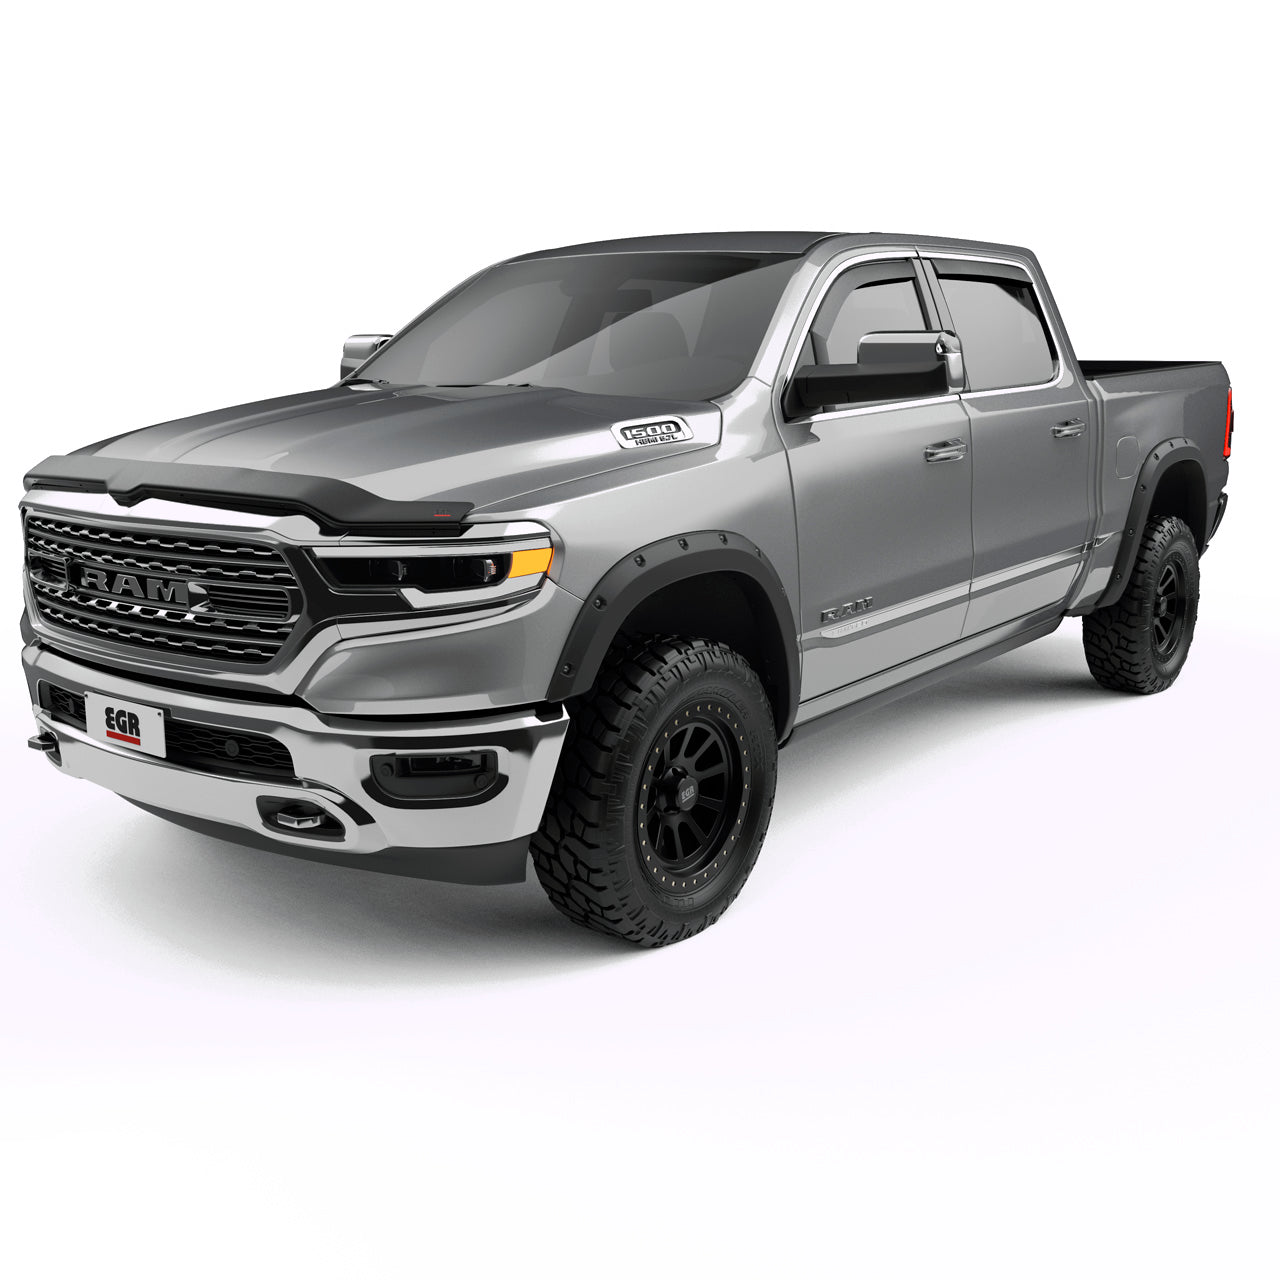 EGR Traditional Bolt-on look Fender Flares with Black-out Bolt Kit - 19-23 Ram 1500 non-Rebel non-TRX set of 4